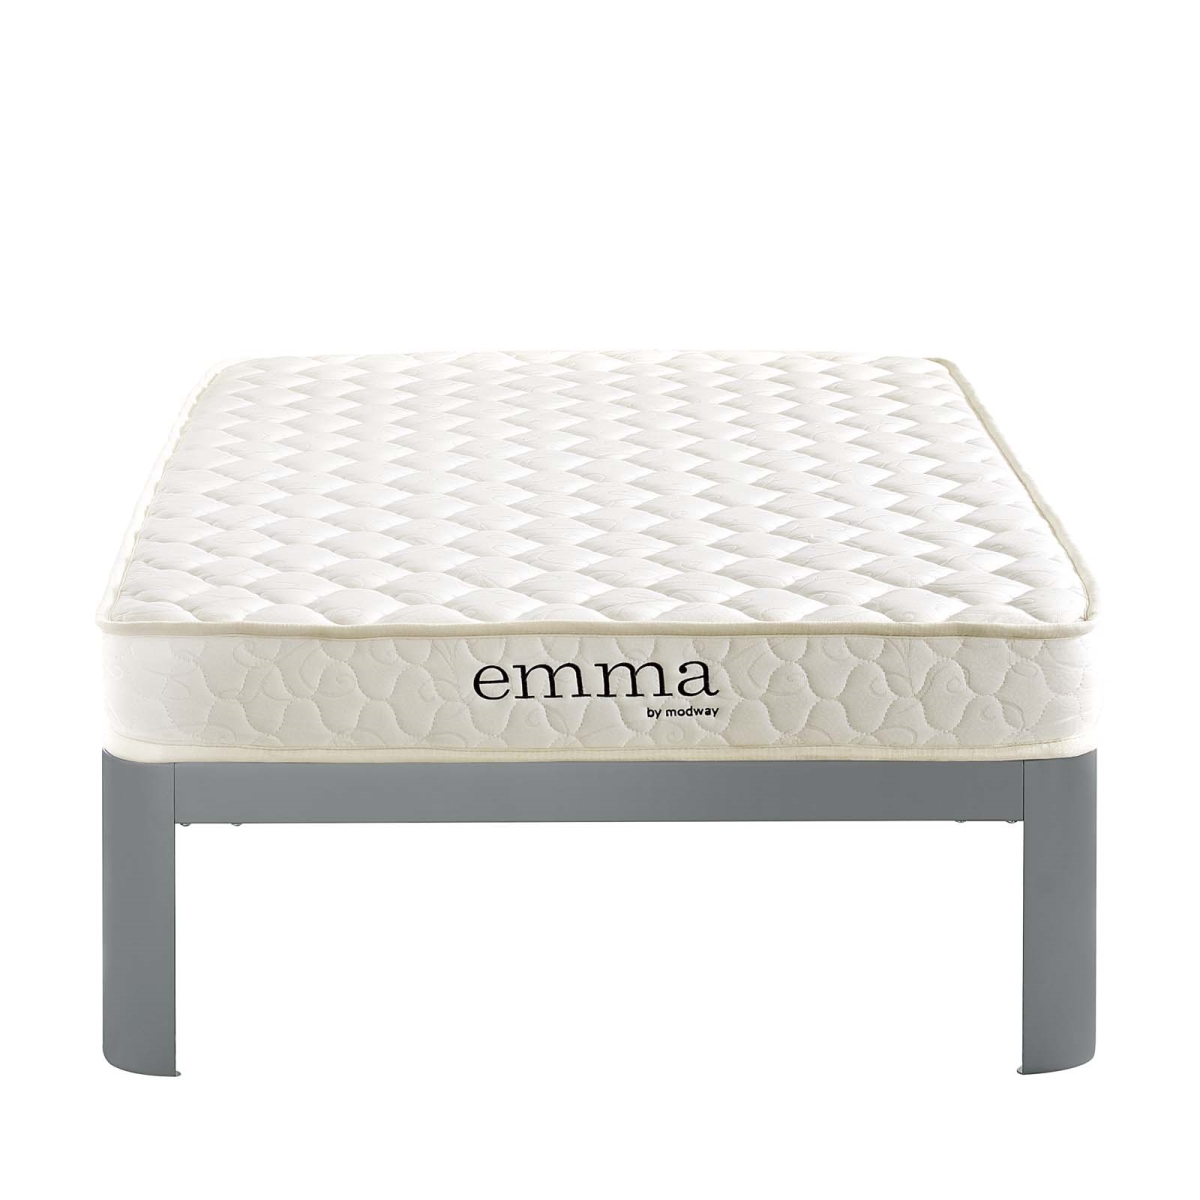 Picture of Modway Furniture MOD-5732-WHI 15.5 x 31.5 x 31.5 in. 6 in. Emma Twin XL Mattress